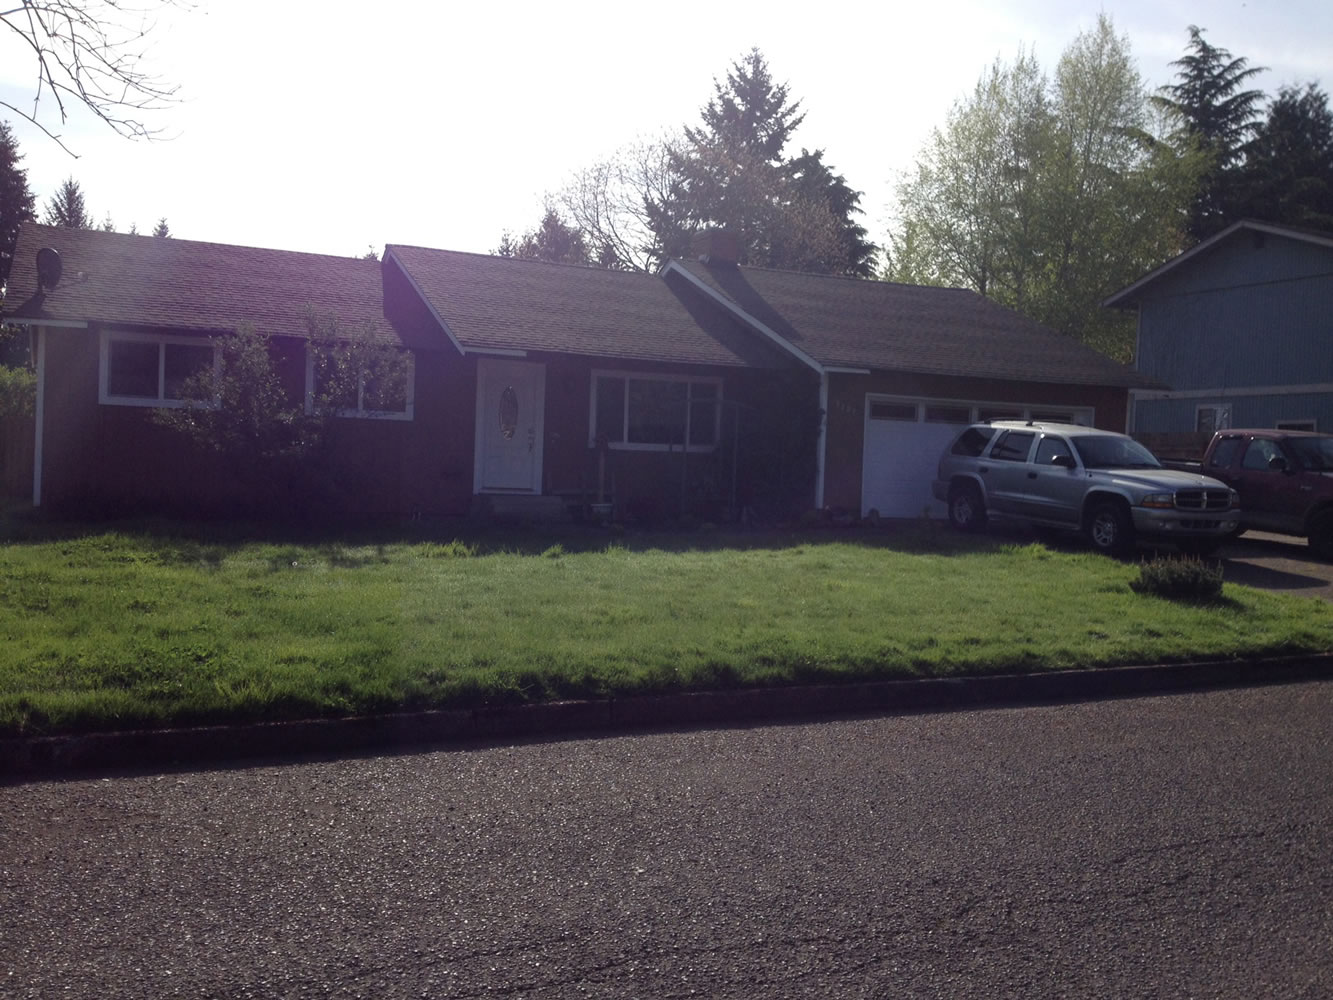 Robert G. Hedgers, 51, and Cheryl L. Honey, 57, were found dead at their Vancouver residence, 3207 N.E.